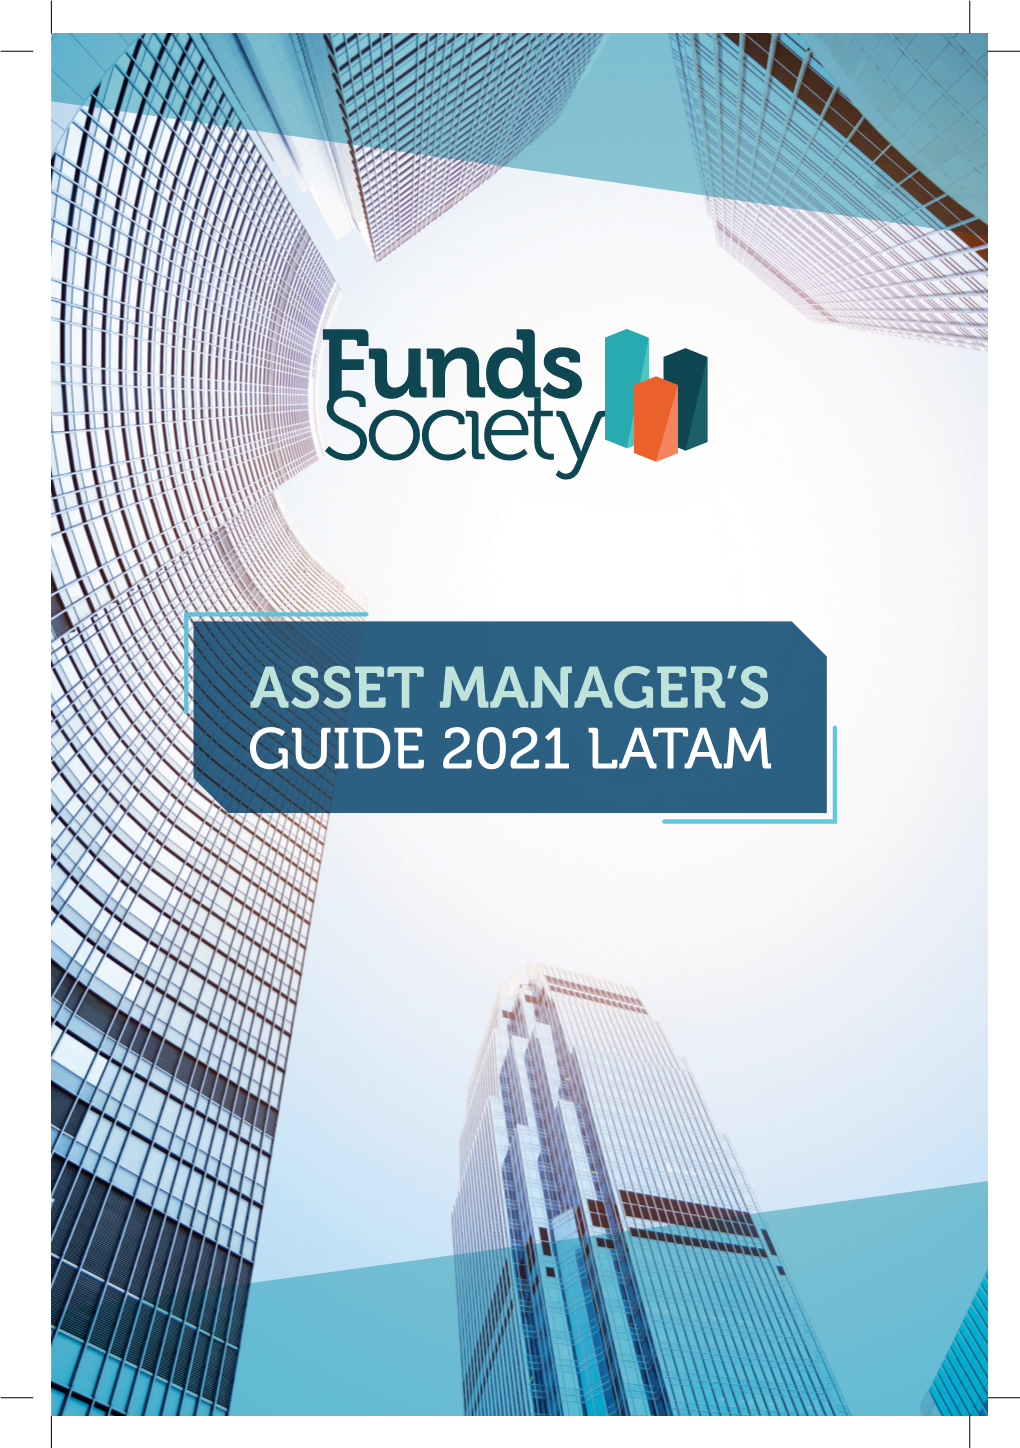 Asset Manager's Guide 2021 Latam